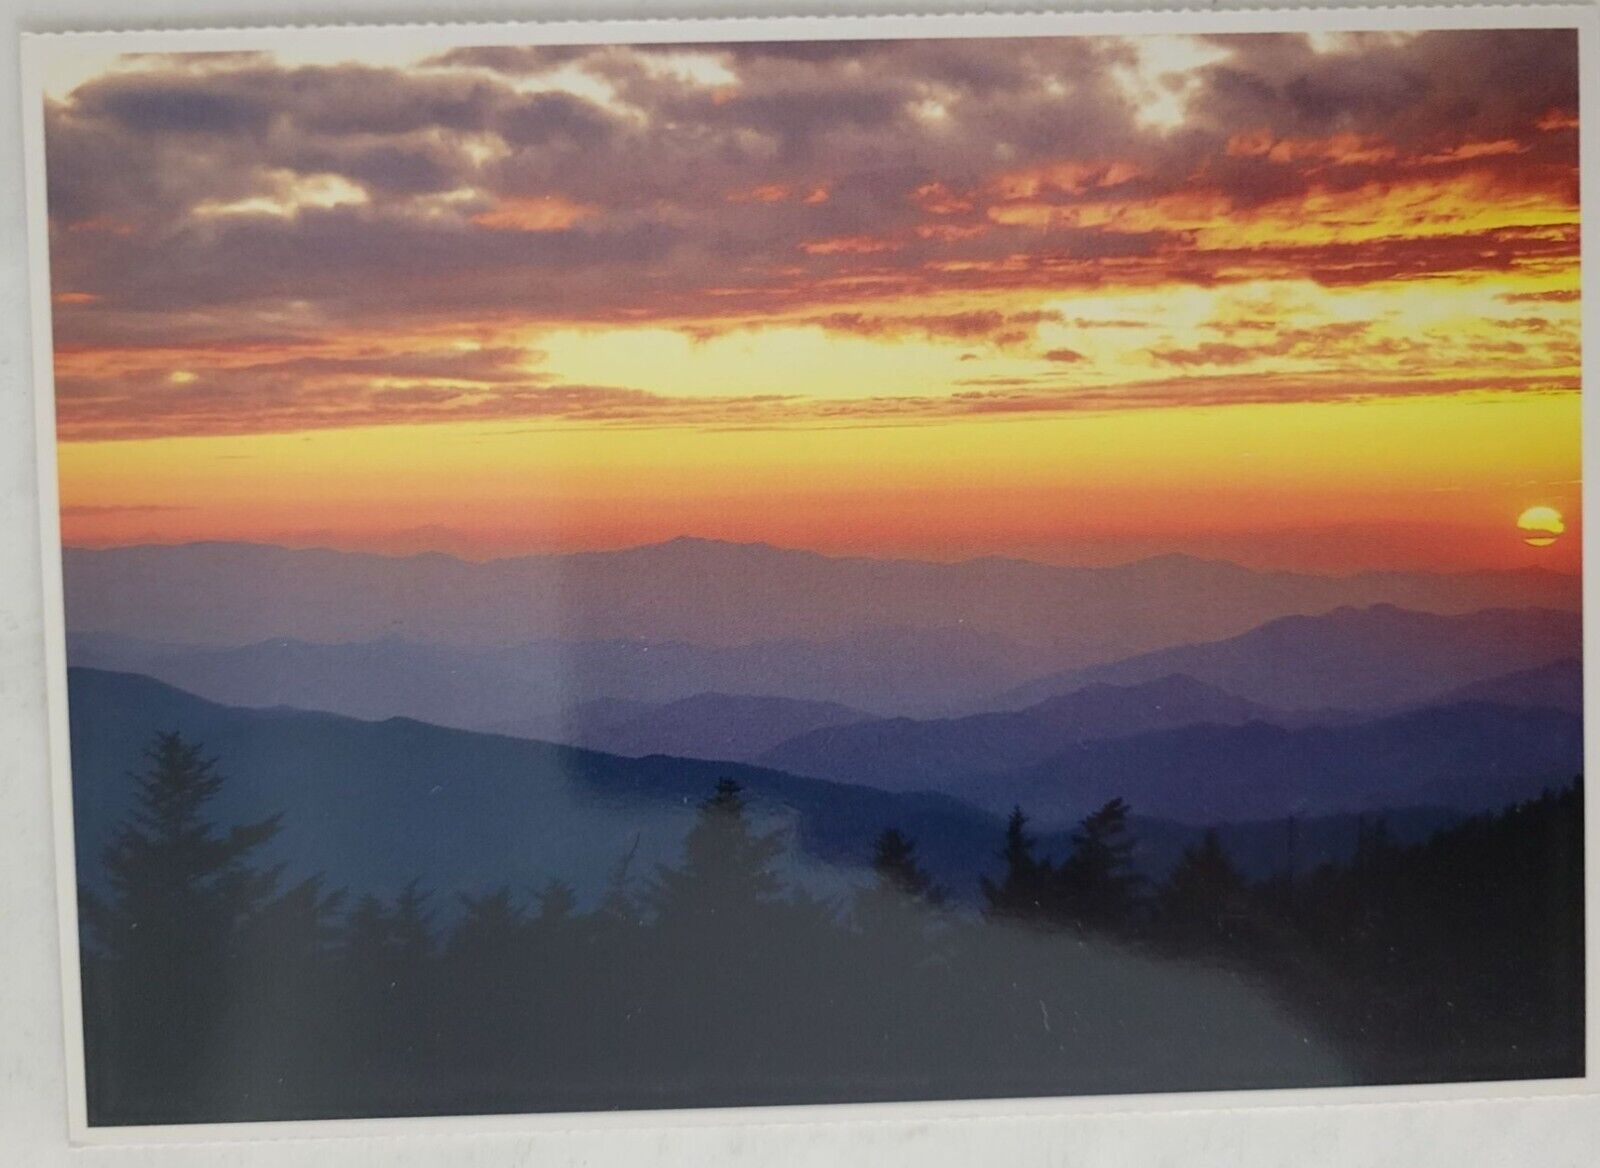 Sunset Great Smoky Mountains National Park Tennessee Postcard 4X6 Unposted